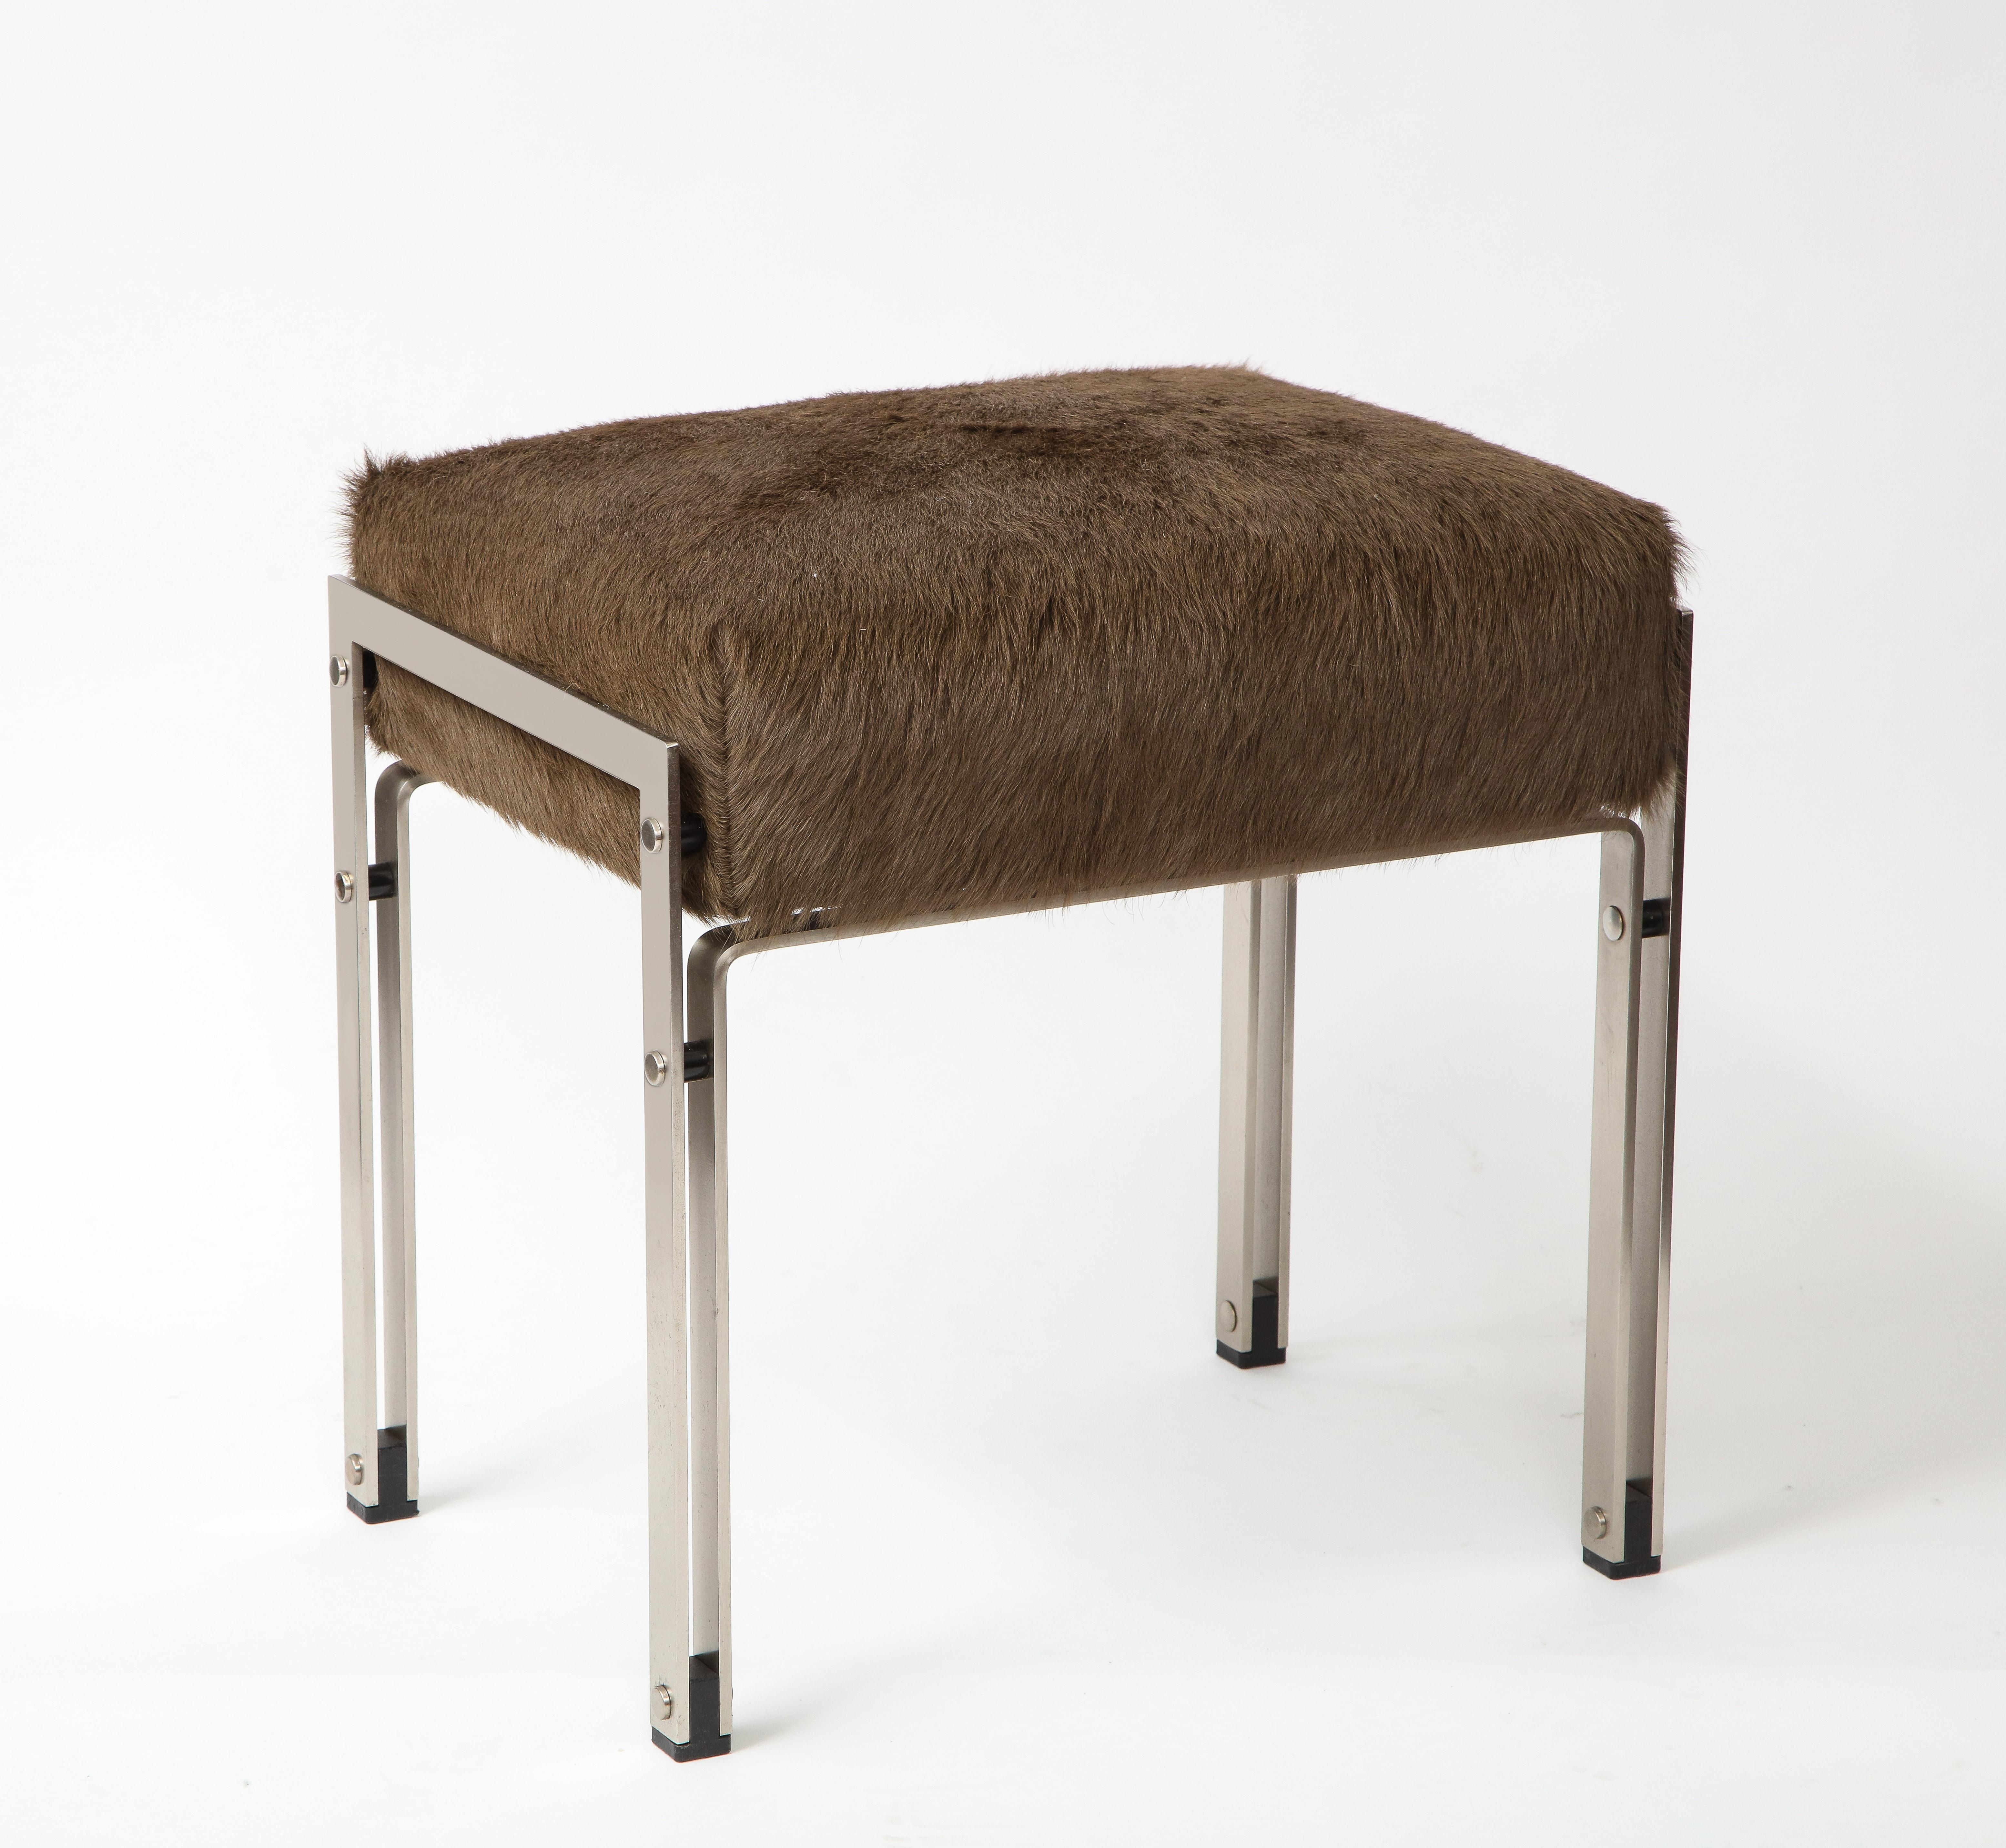 Mid-century chrome upholstered stool, 20th century. 

This stool consists of sleek, flat-edge chrome legs as well as a comfortable seat that has been newly recovered in a plush brown hair-on-hide.

Excellent vintage condition.